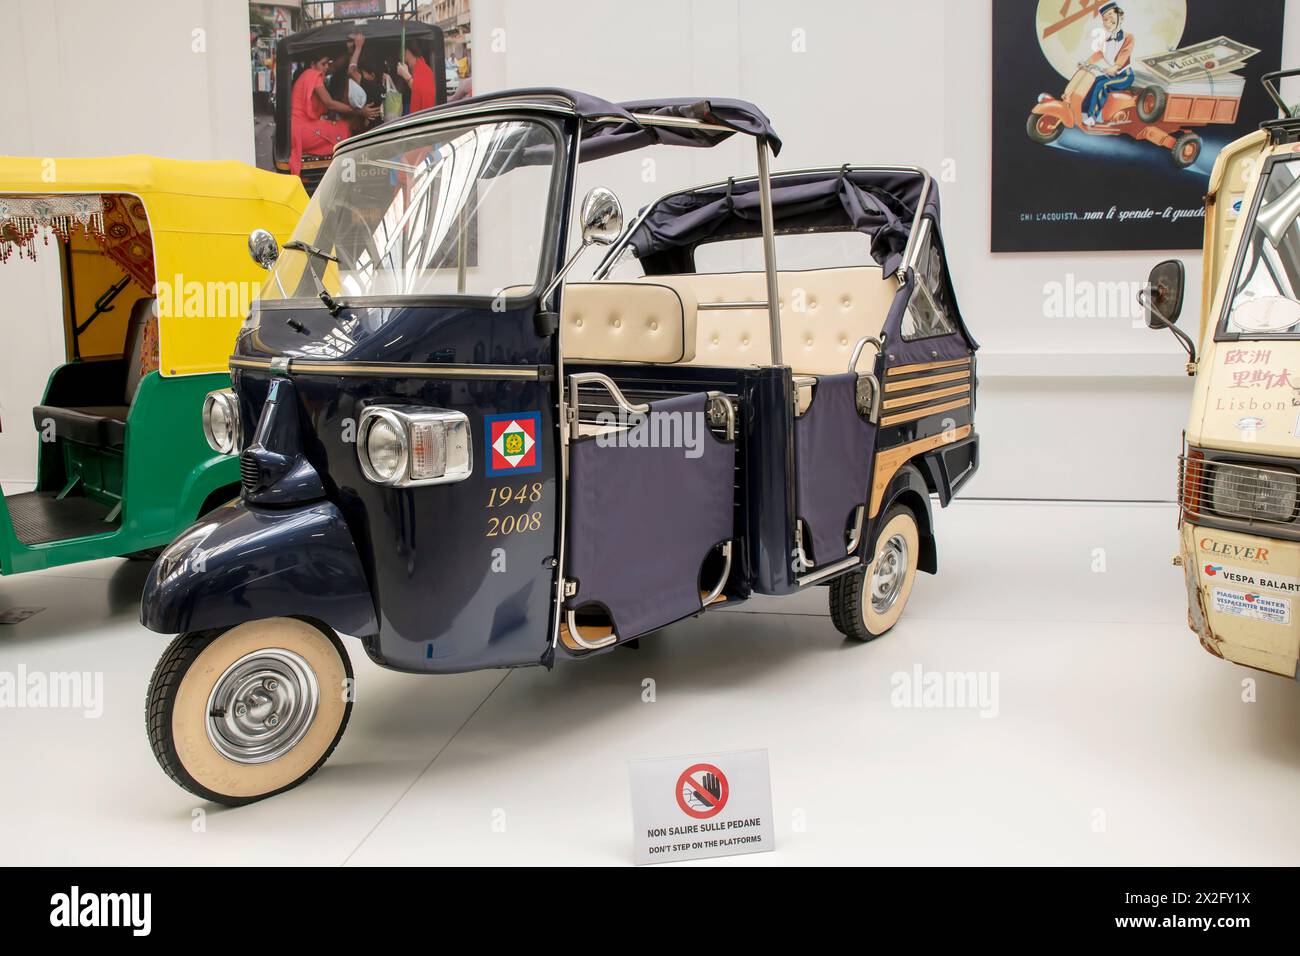 An old presidential Ape on display at the Piaggio museum in Pontedera, Pisa, Italy Stock Photo